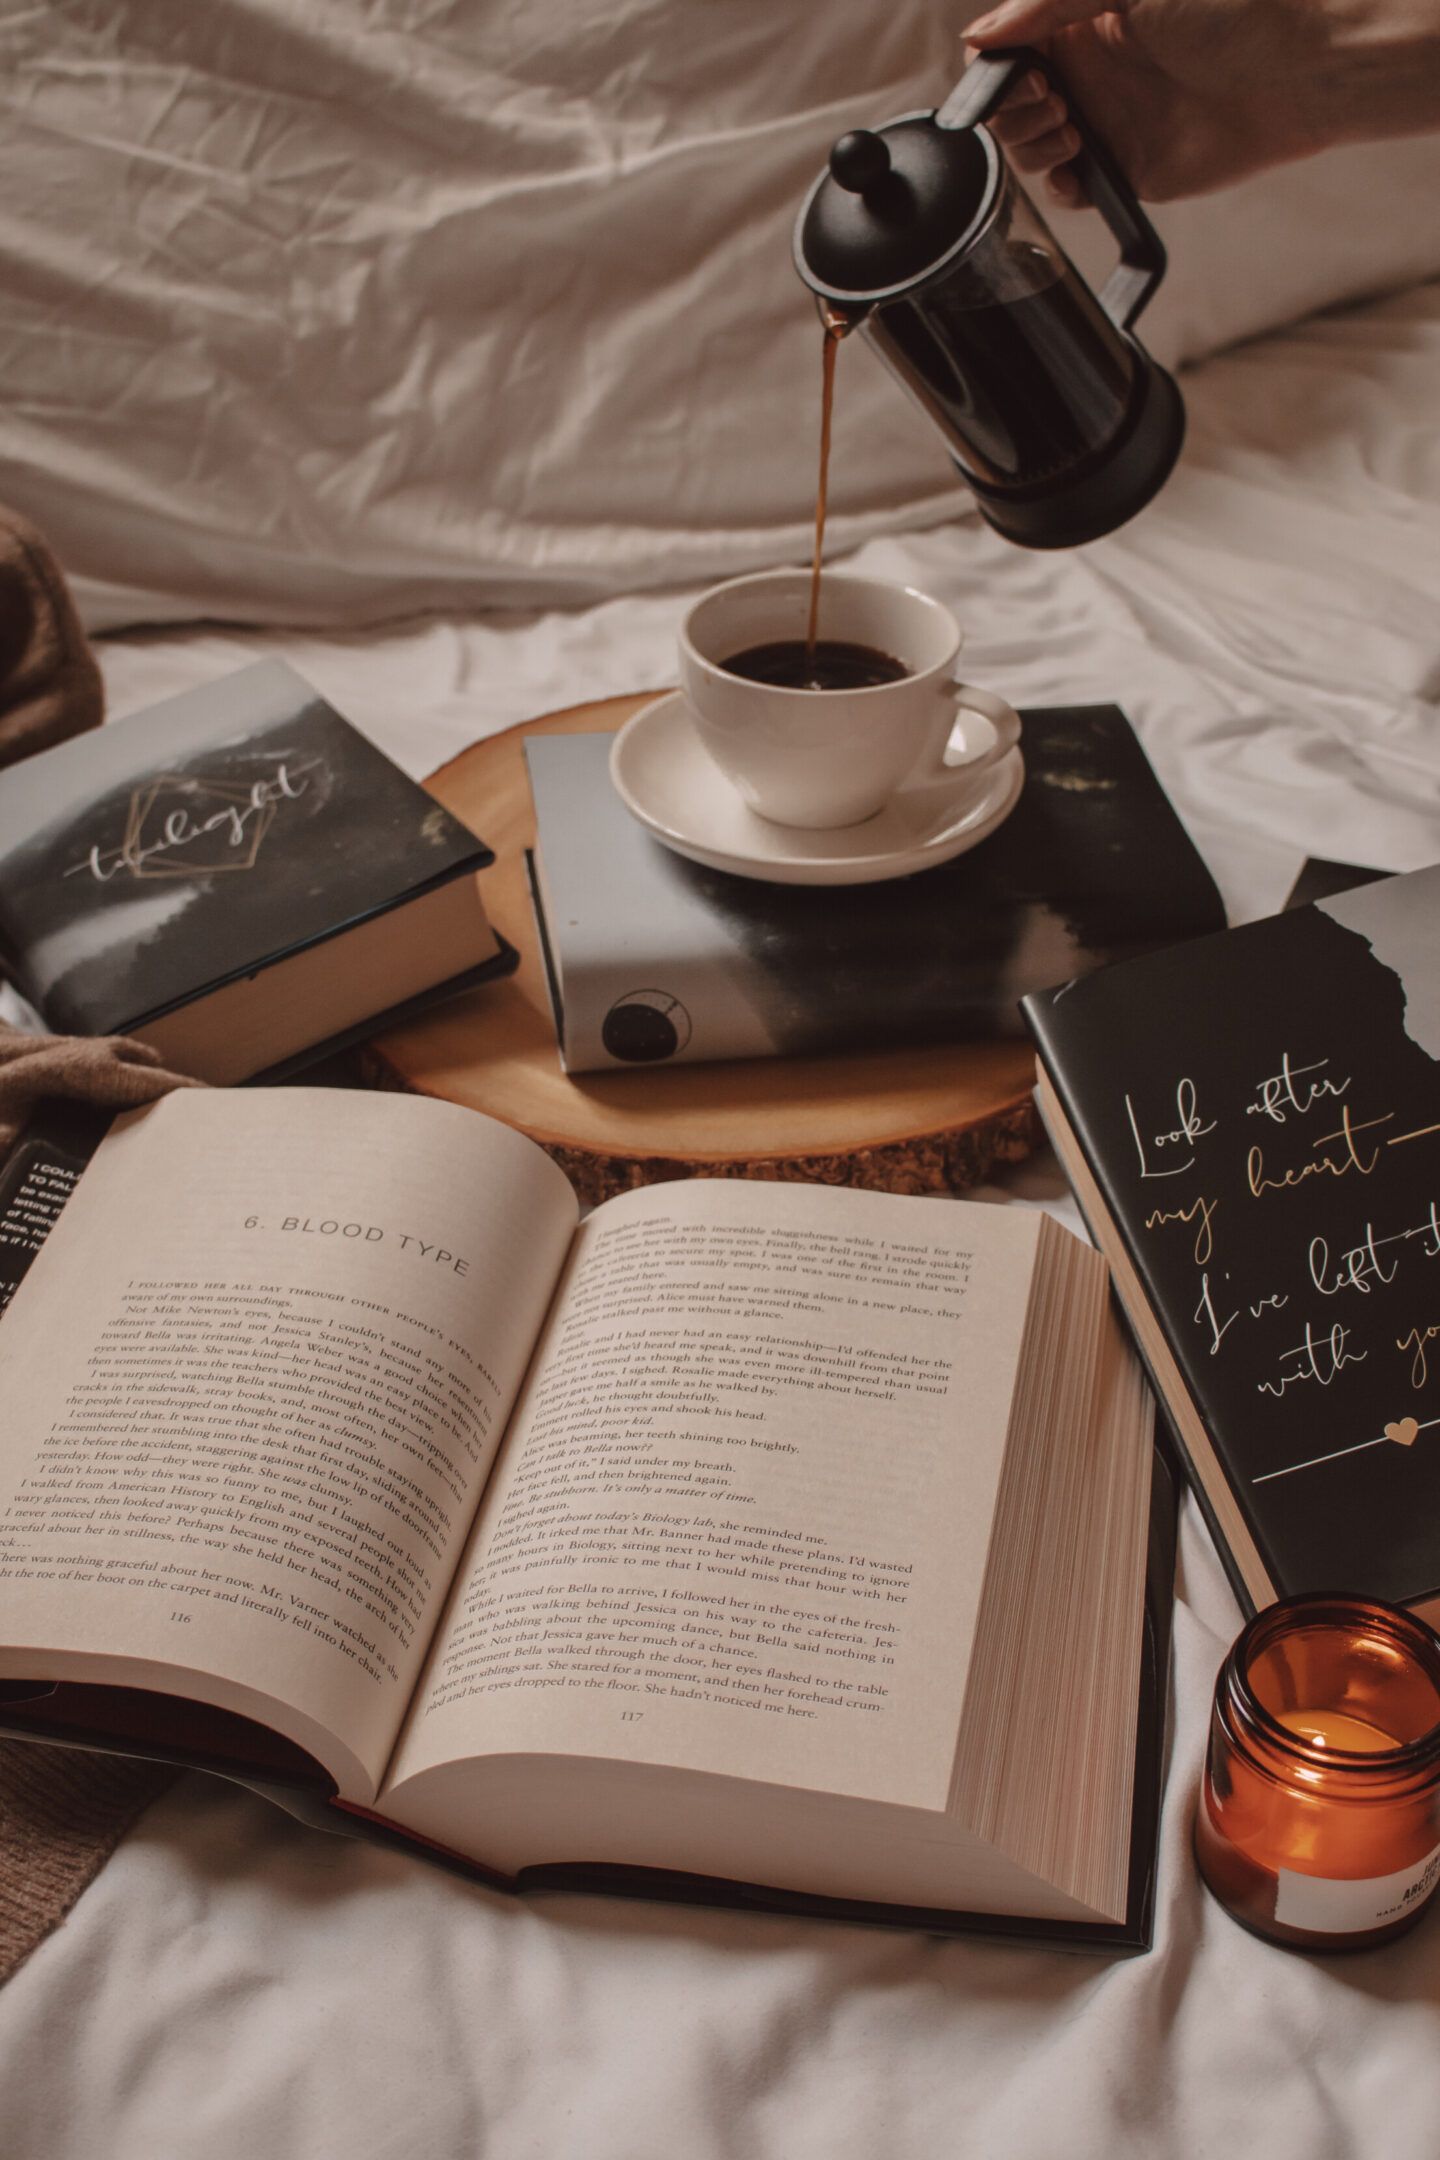 A book open on a bed with a cup of coffee being poured into a mug. - Books, coffee